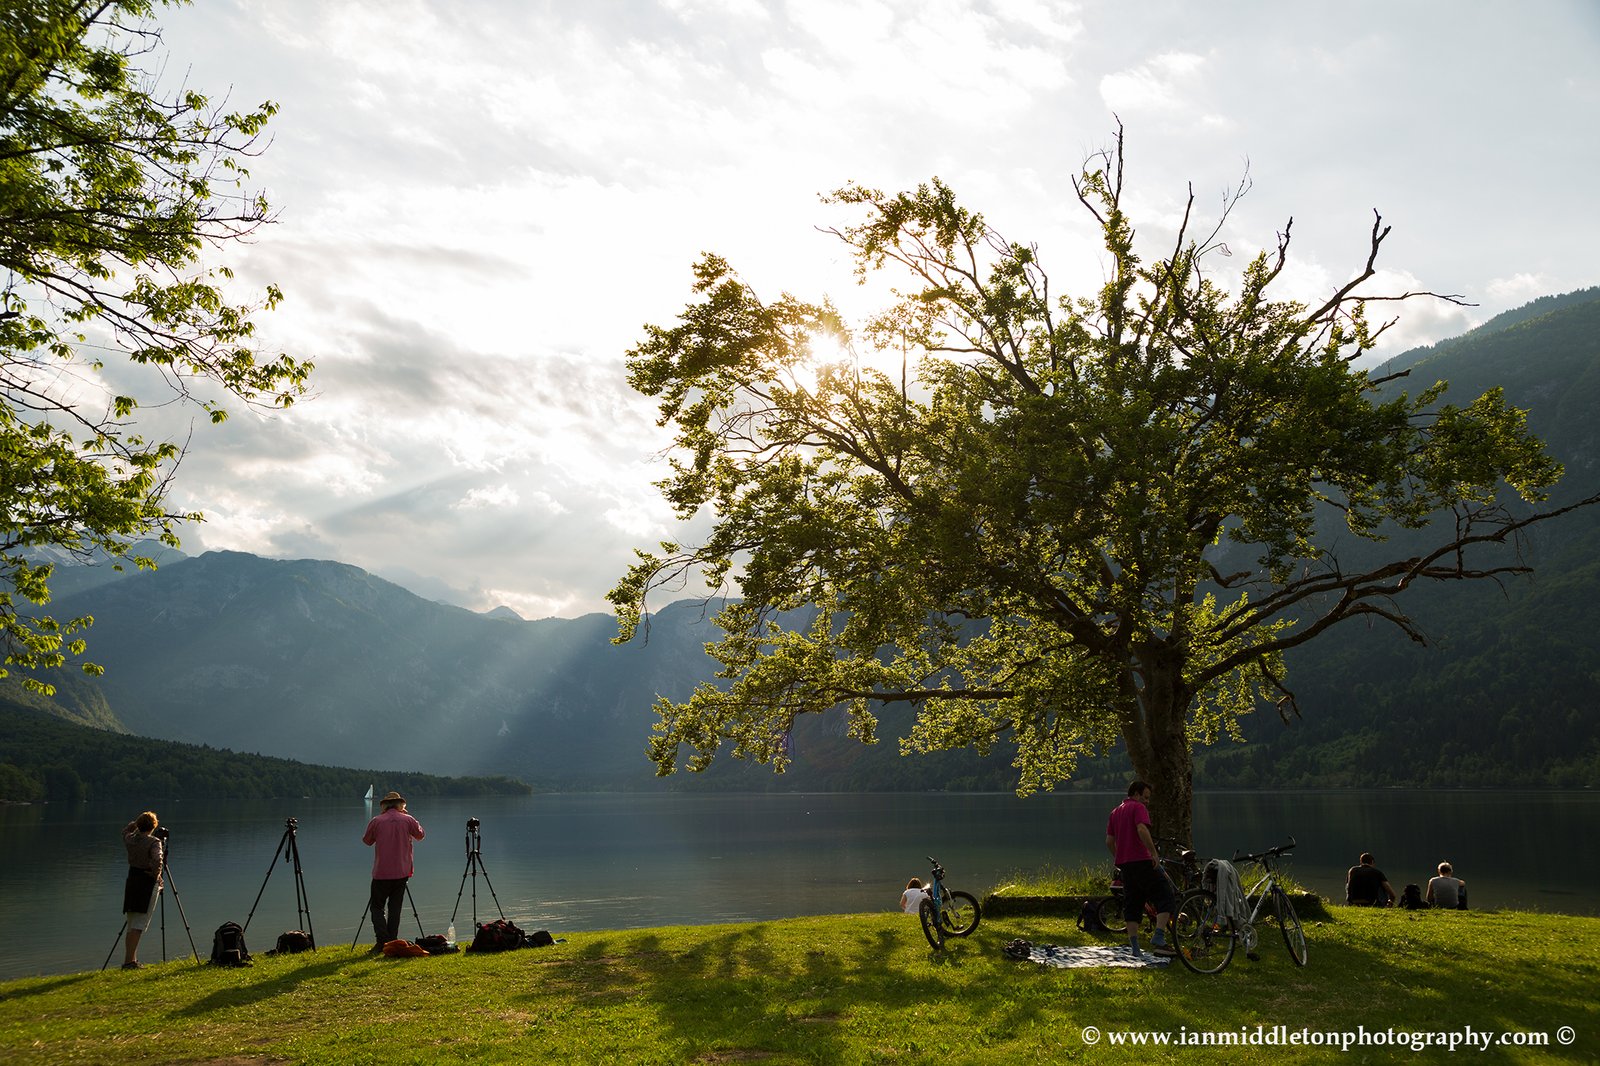 Workshop participants photographing beautiful light and clouds scattering over Bohinj Lake,Triglav National Park, Slovenia.